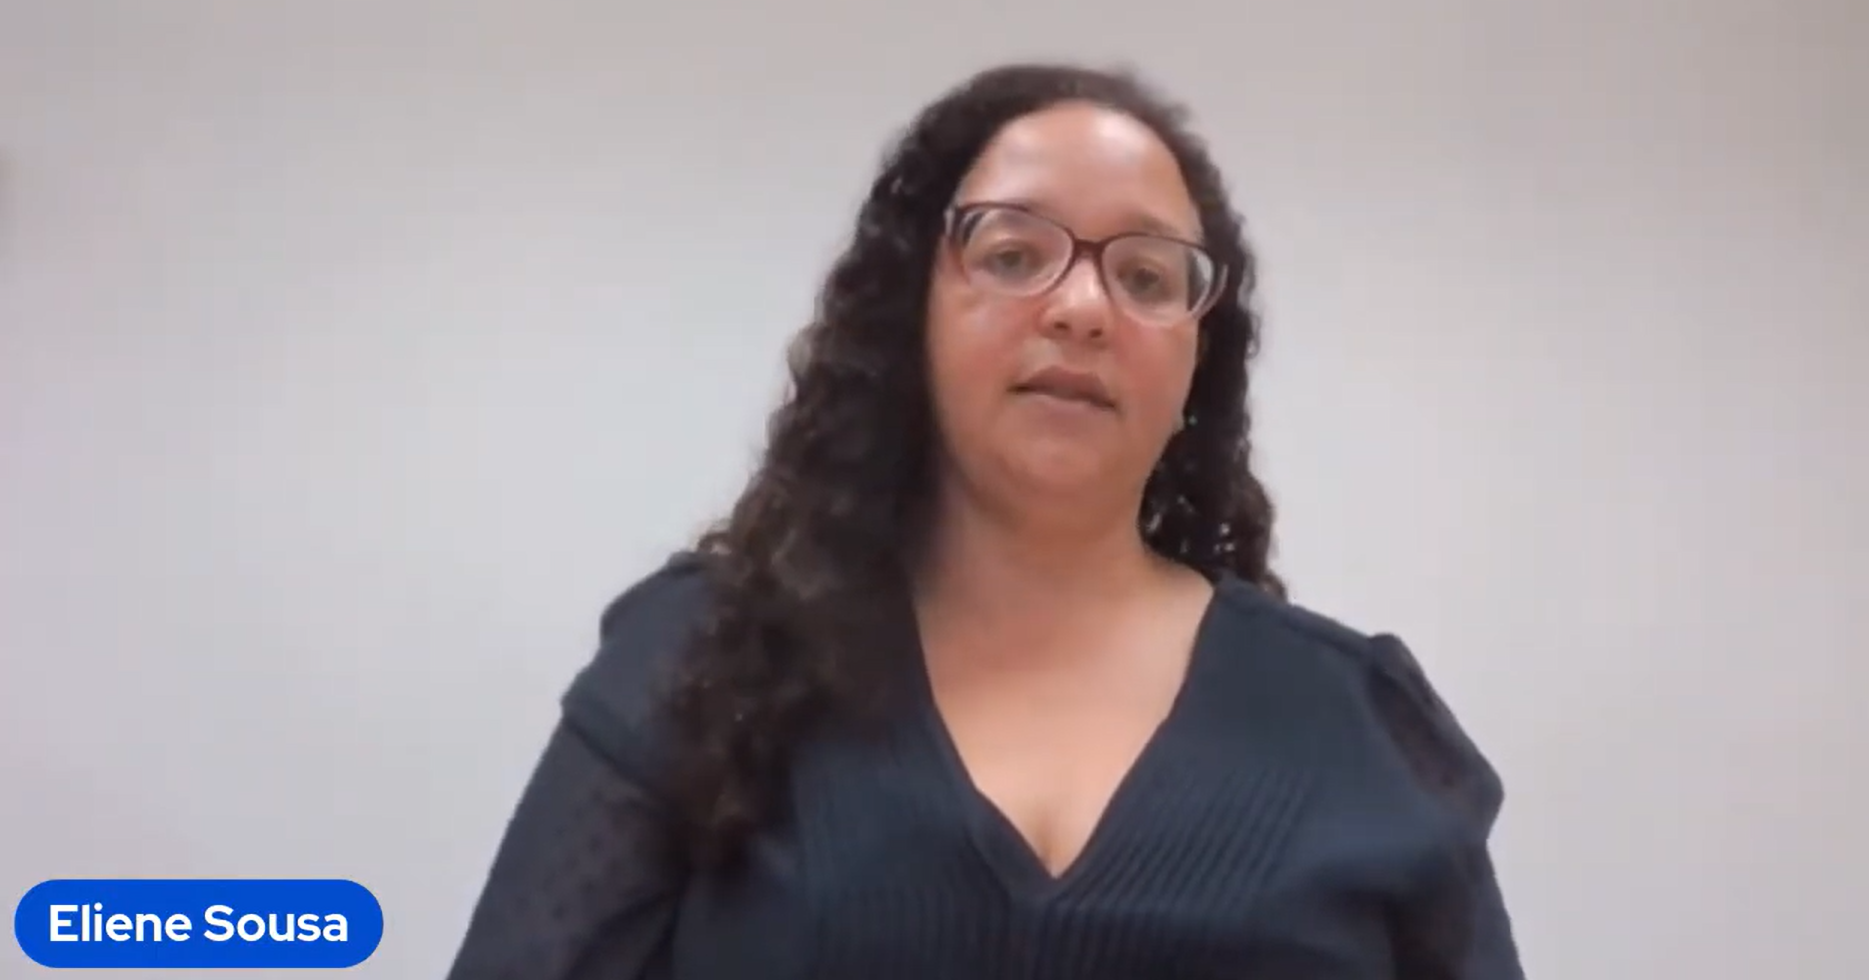 Eliene Souza, a light-skinned black woman with long curly hair wearing a dark blue blouse and glasses in front of a white background.